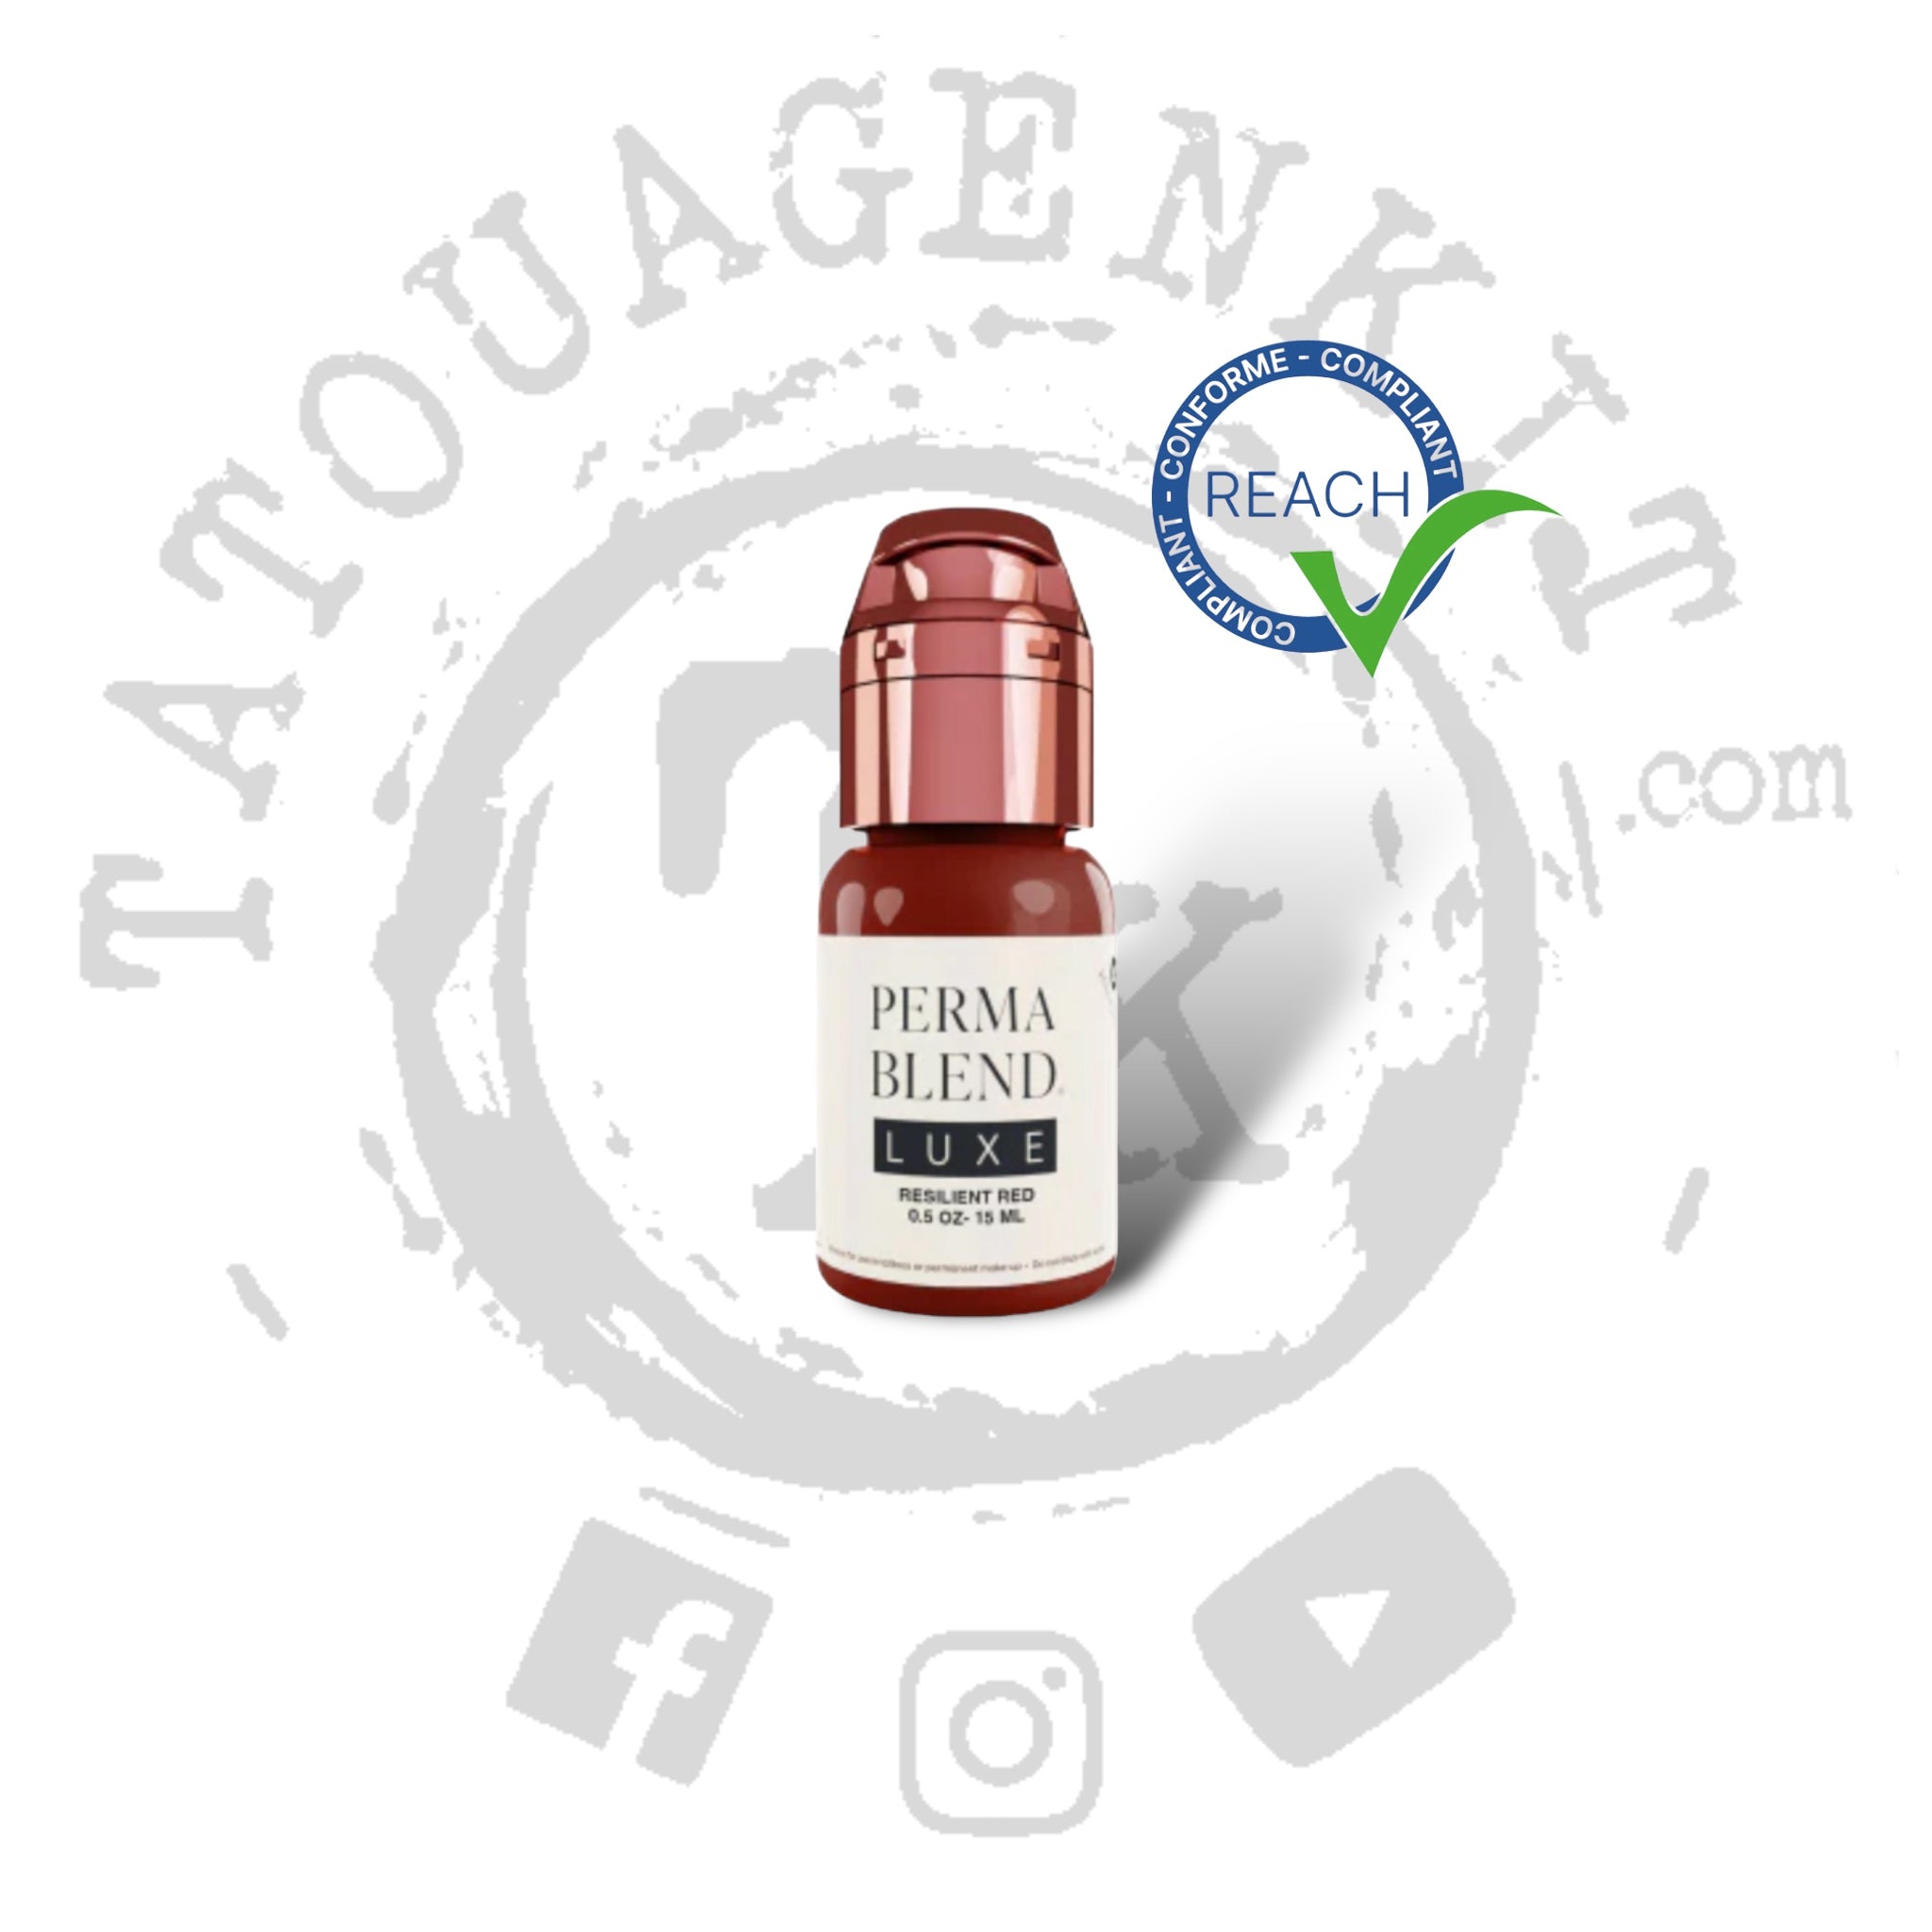 Encre Maquillage Perma Blend Luxe 15ml - Resilient Red